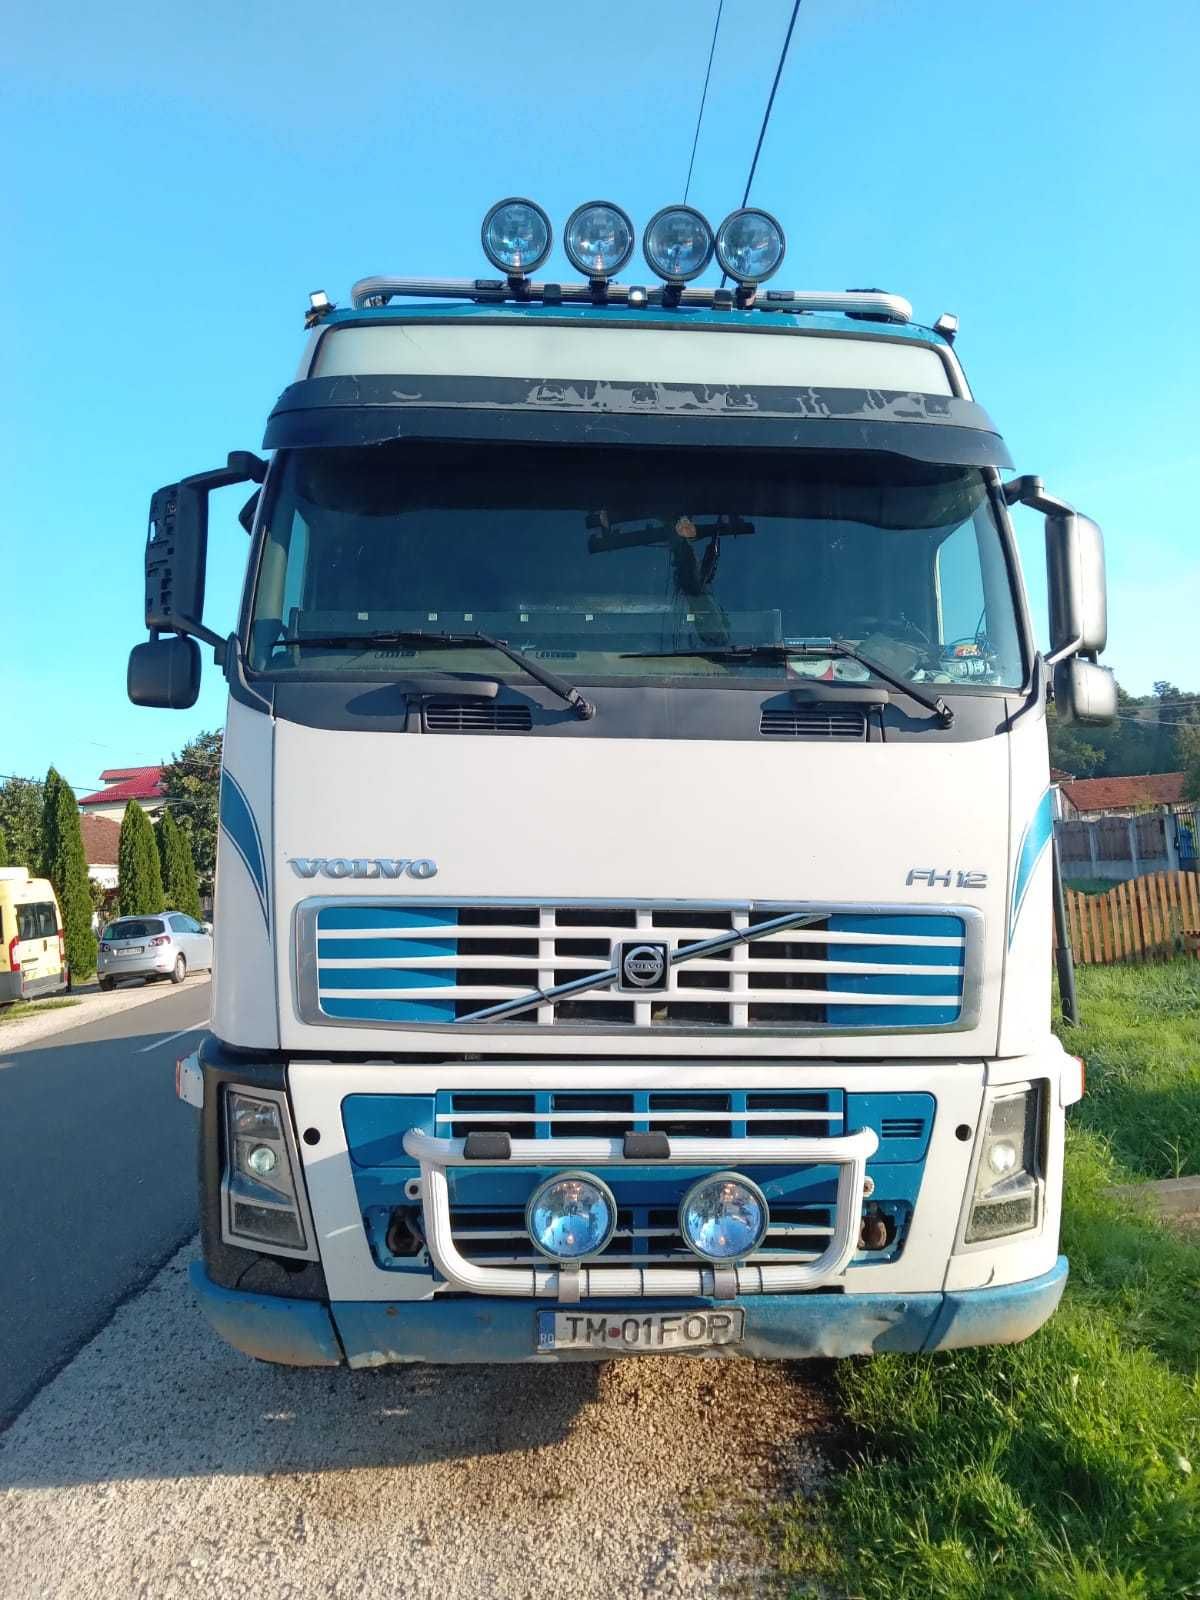 Vand camion forestier cu macara Volvo FH12, 2004